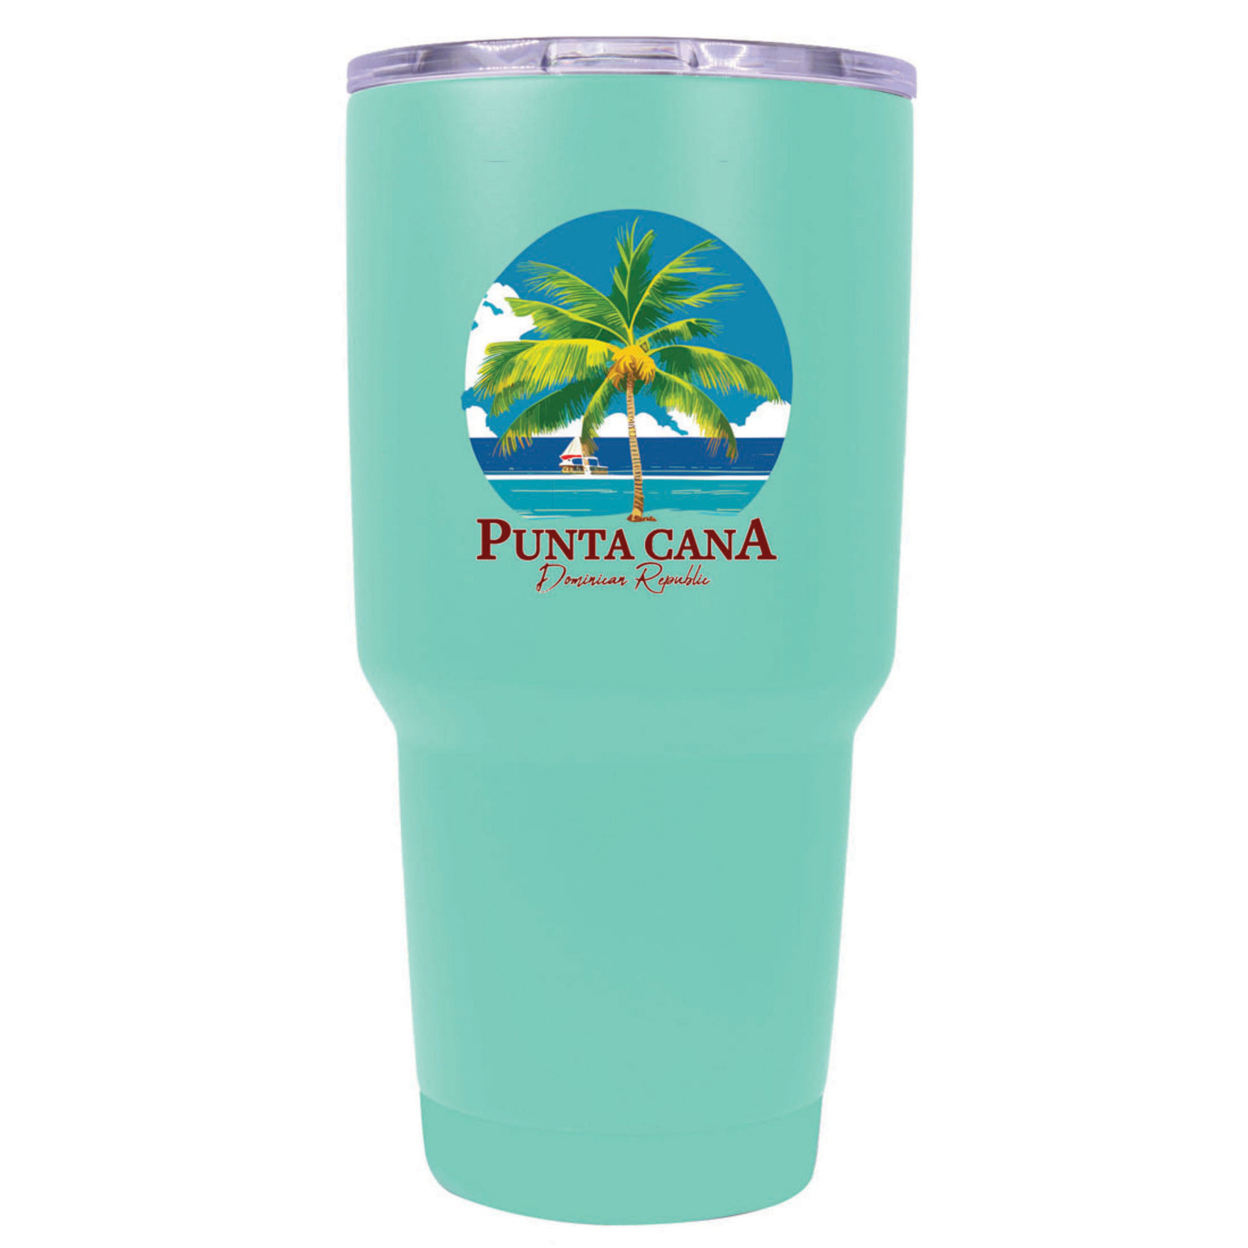 Punta Cana Dominican Republic Souvenir 24 Oz Insulated Stainless Steel Tumbler - Red, PALM